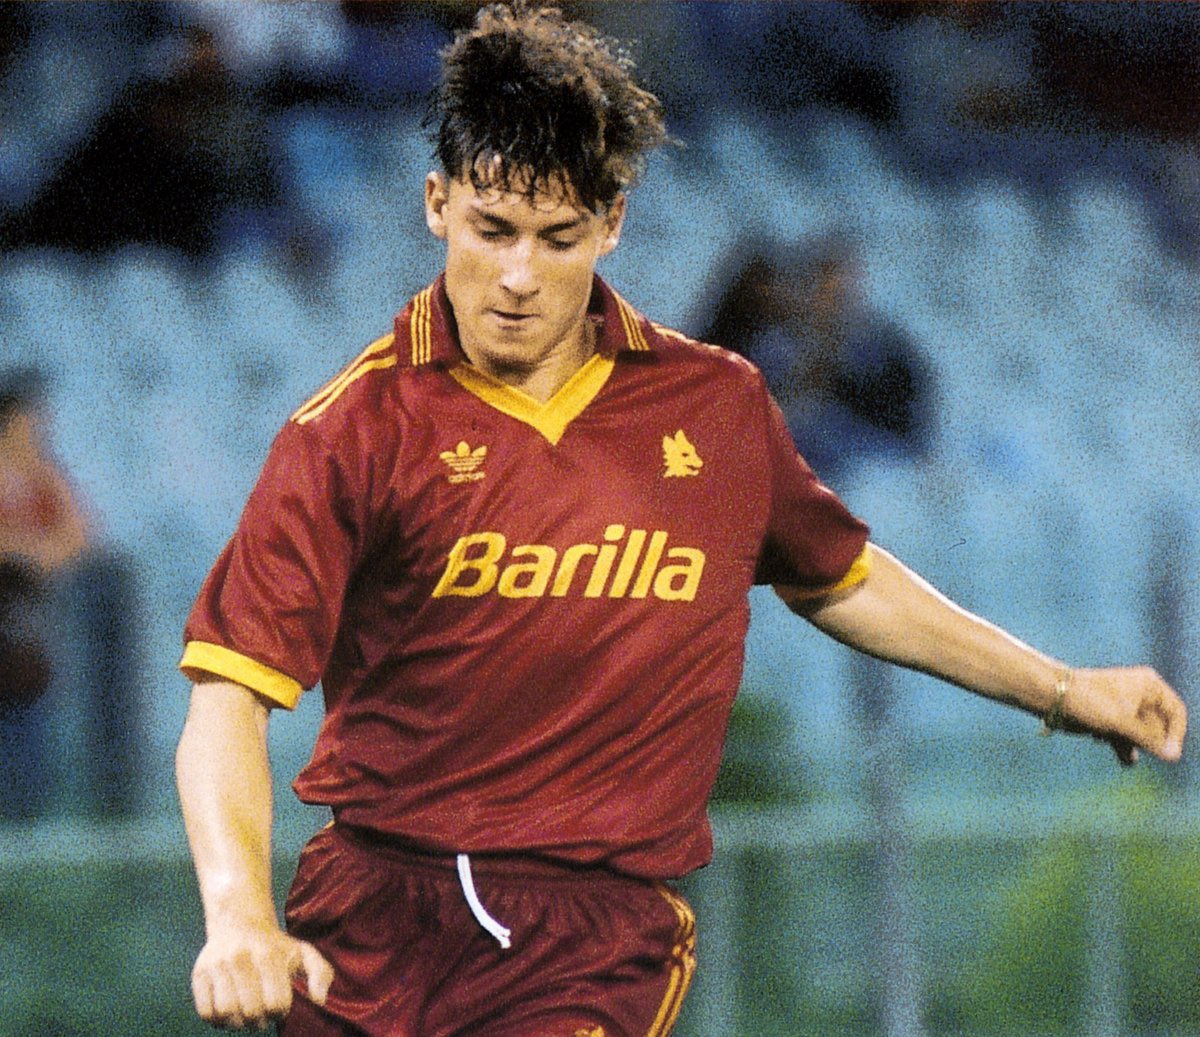 Francesco Totti makes his debut in one of 𝐭𝐡𝐞 great Roma kits. Magnifico.